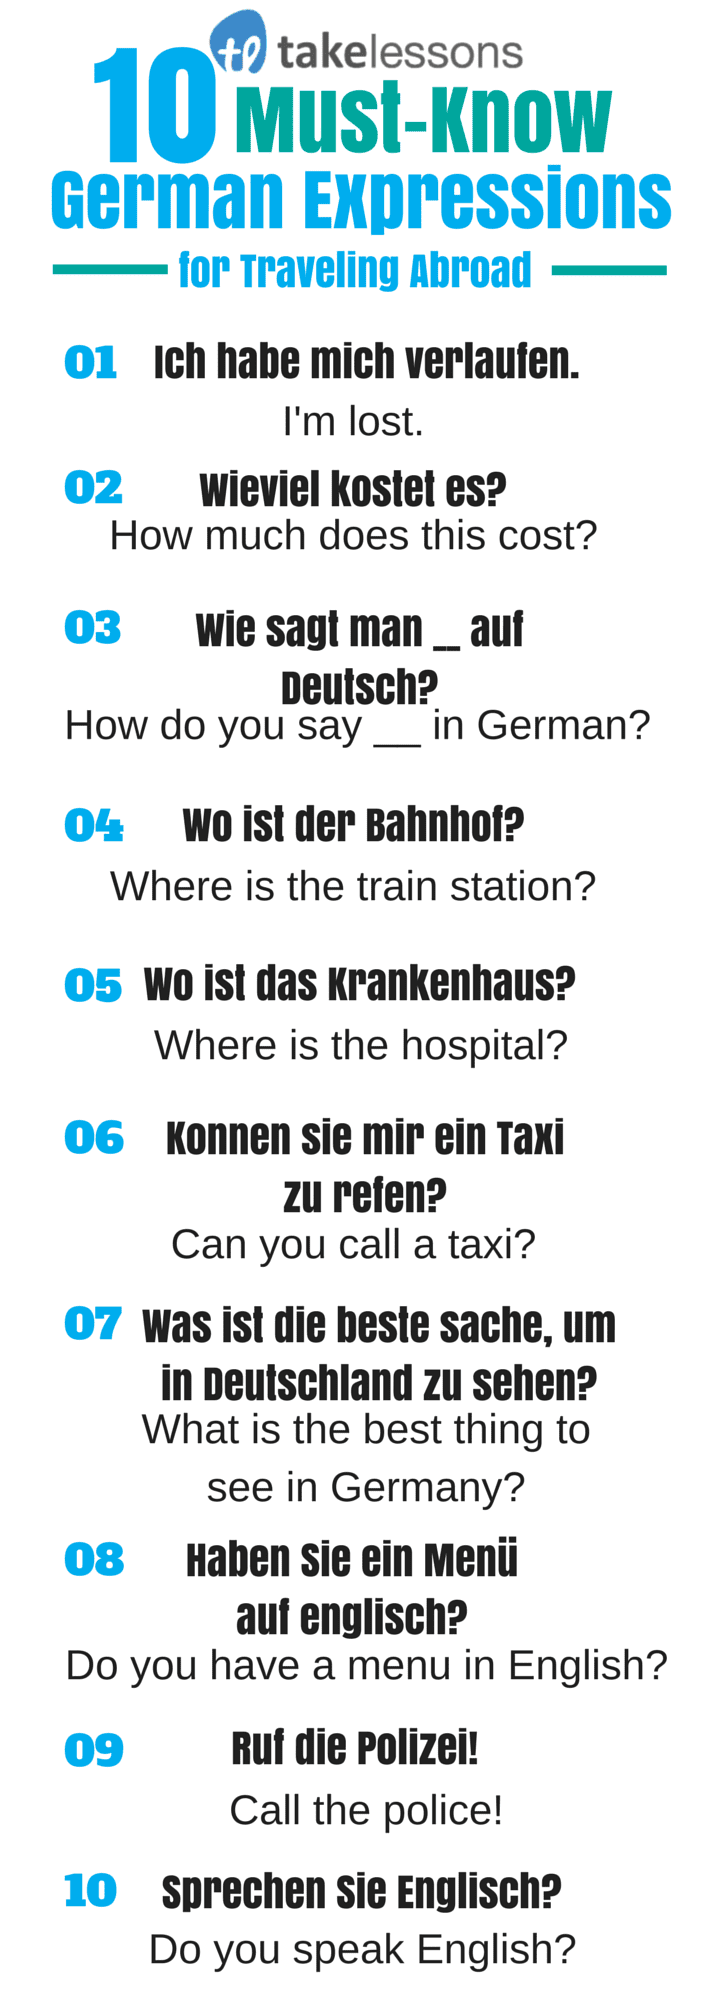 10 Must-Know German Expressions for Traveling Abroad